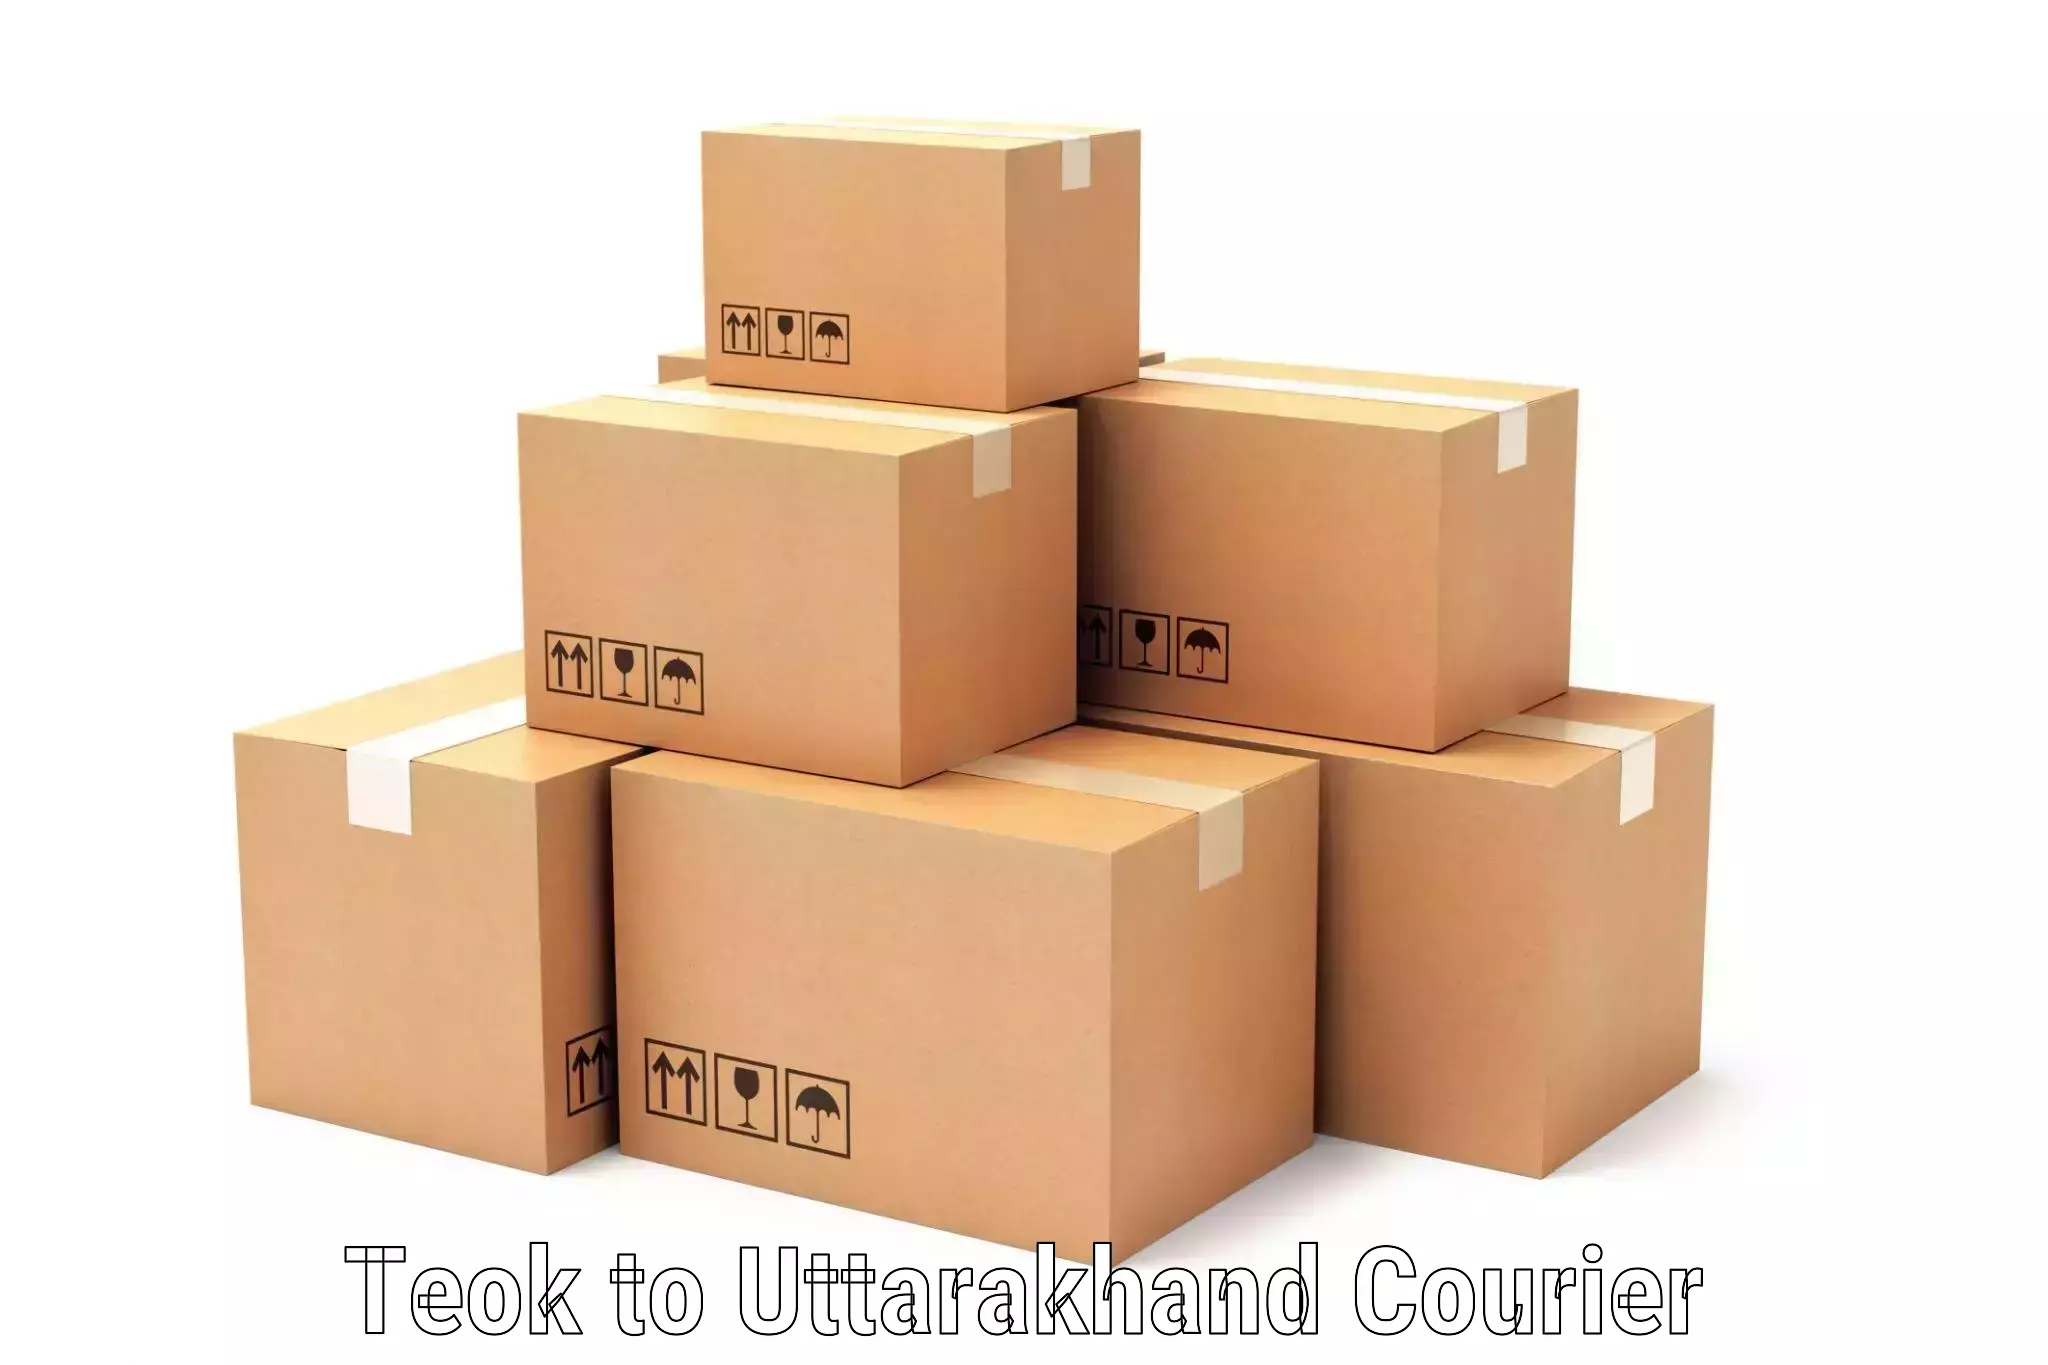 Nationwide parcel services Teok to Rishikesh